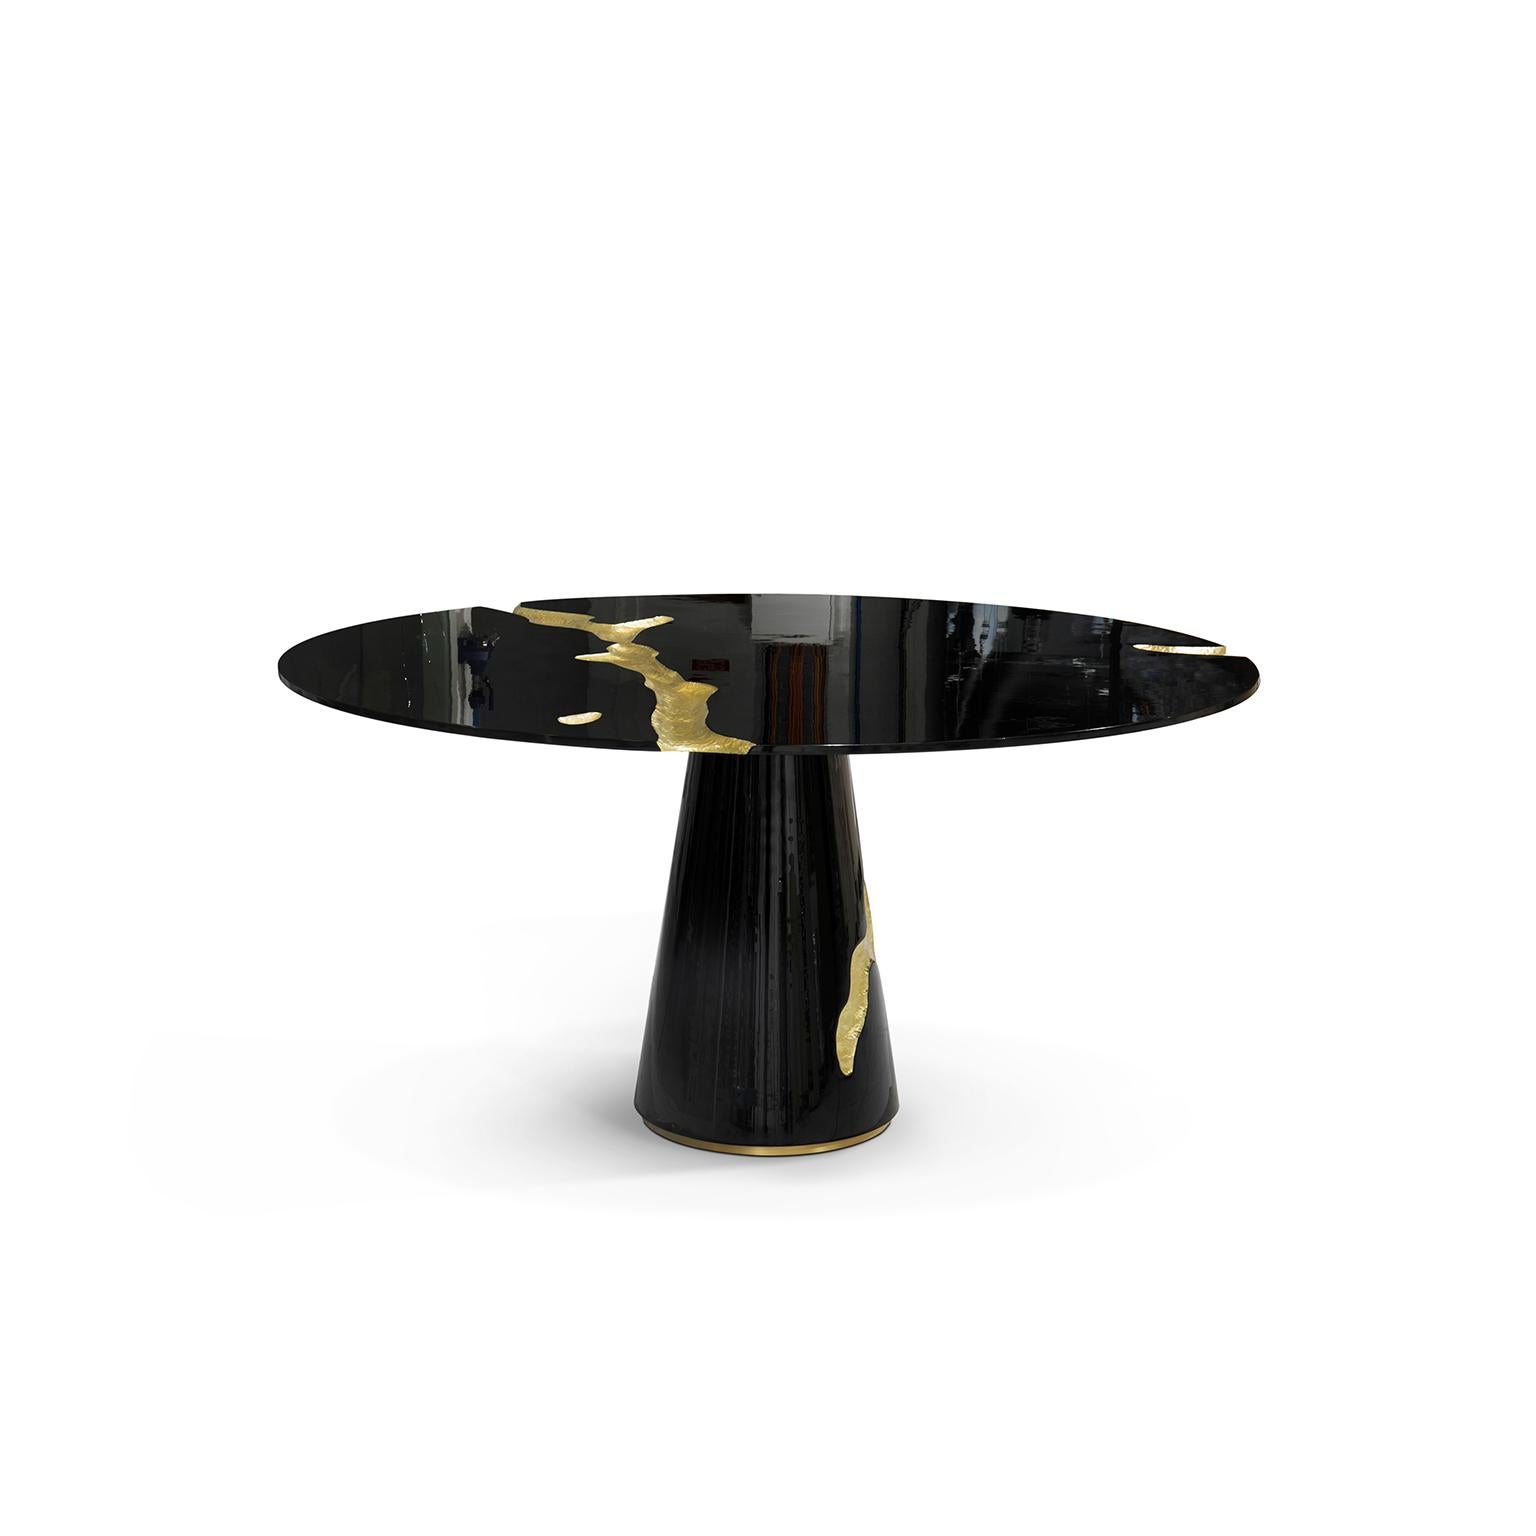 Great Empire’s take centuries to build, and those who rise after taking a fall find their true strength. It goes without saying that great decisions are taken around powerful tables among determined minds. The Empire dining table symbolizes